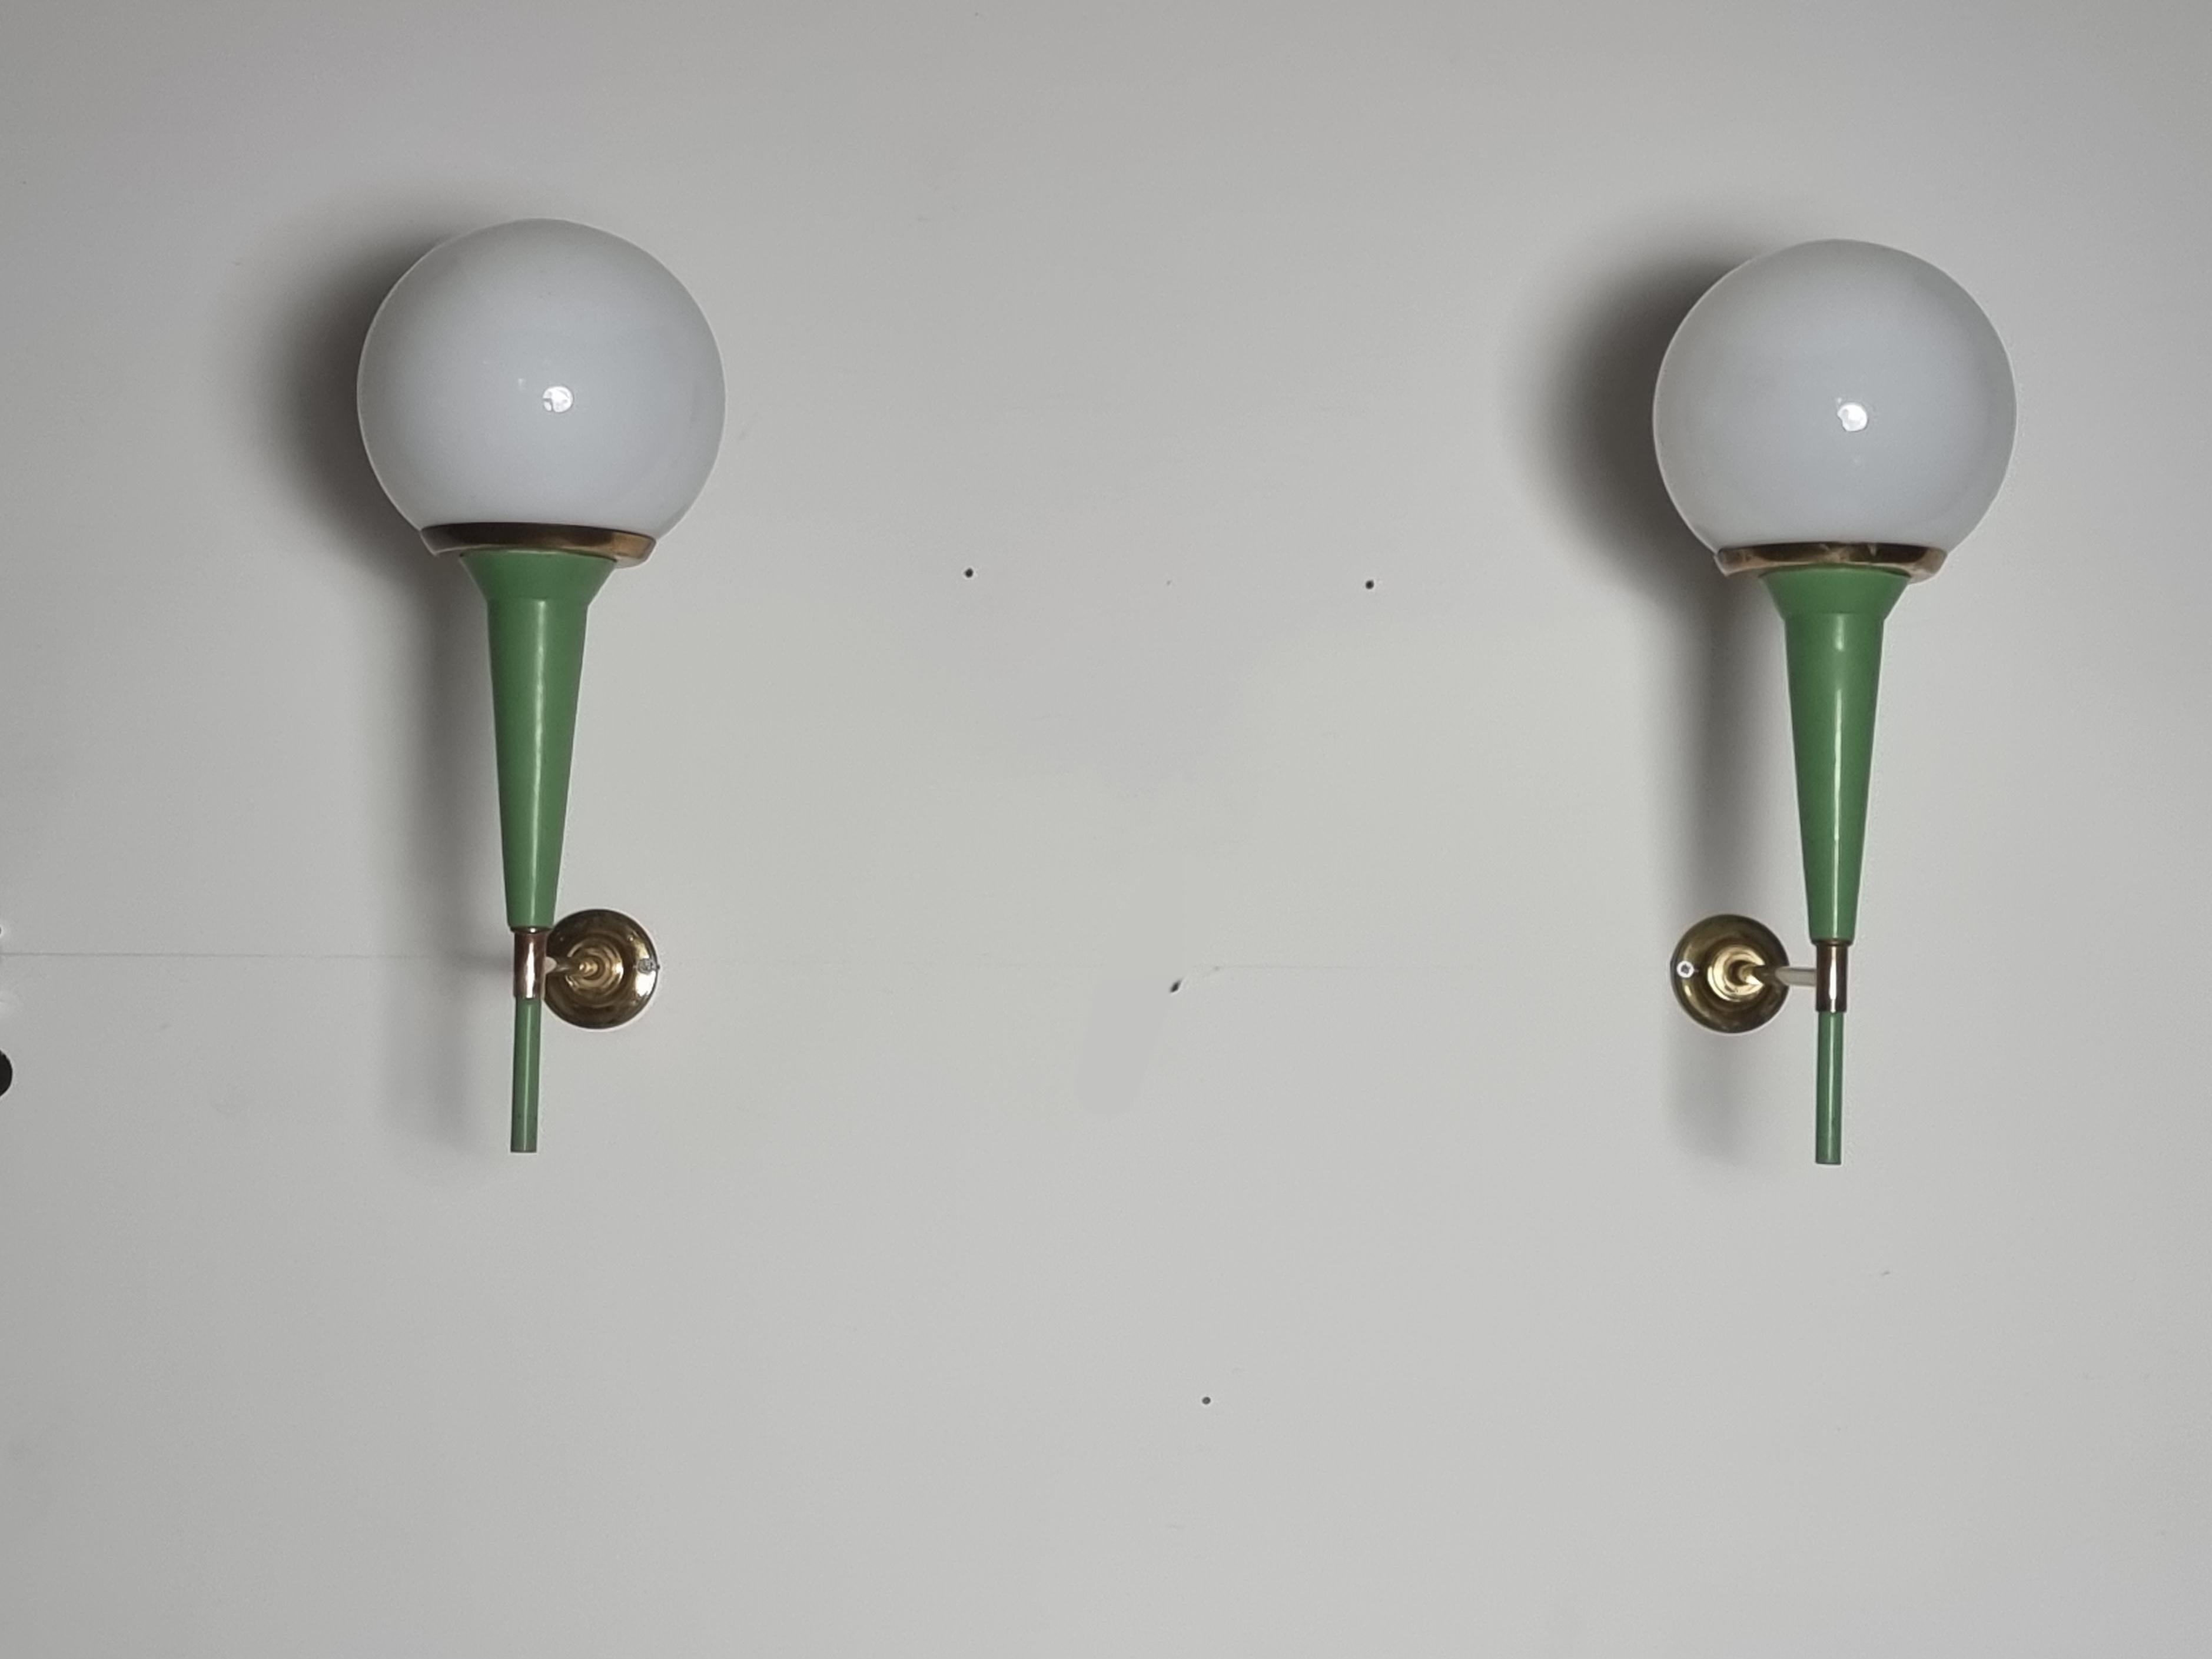 European Set of 2 Enamel and Brass Wall Lights/Scones, France, 1950s For Sale